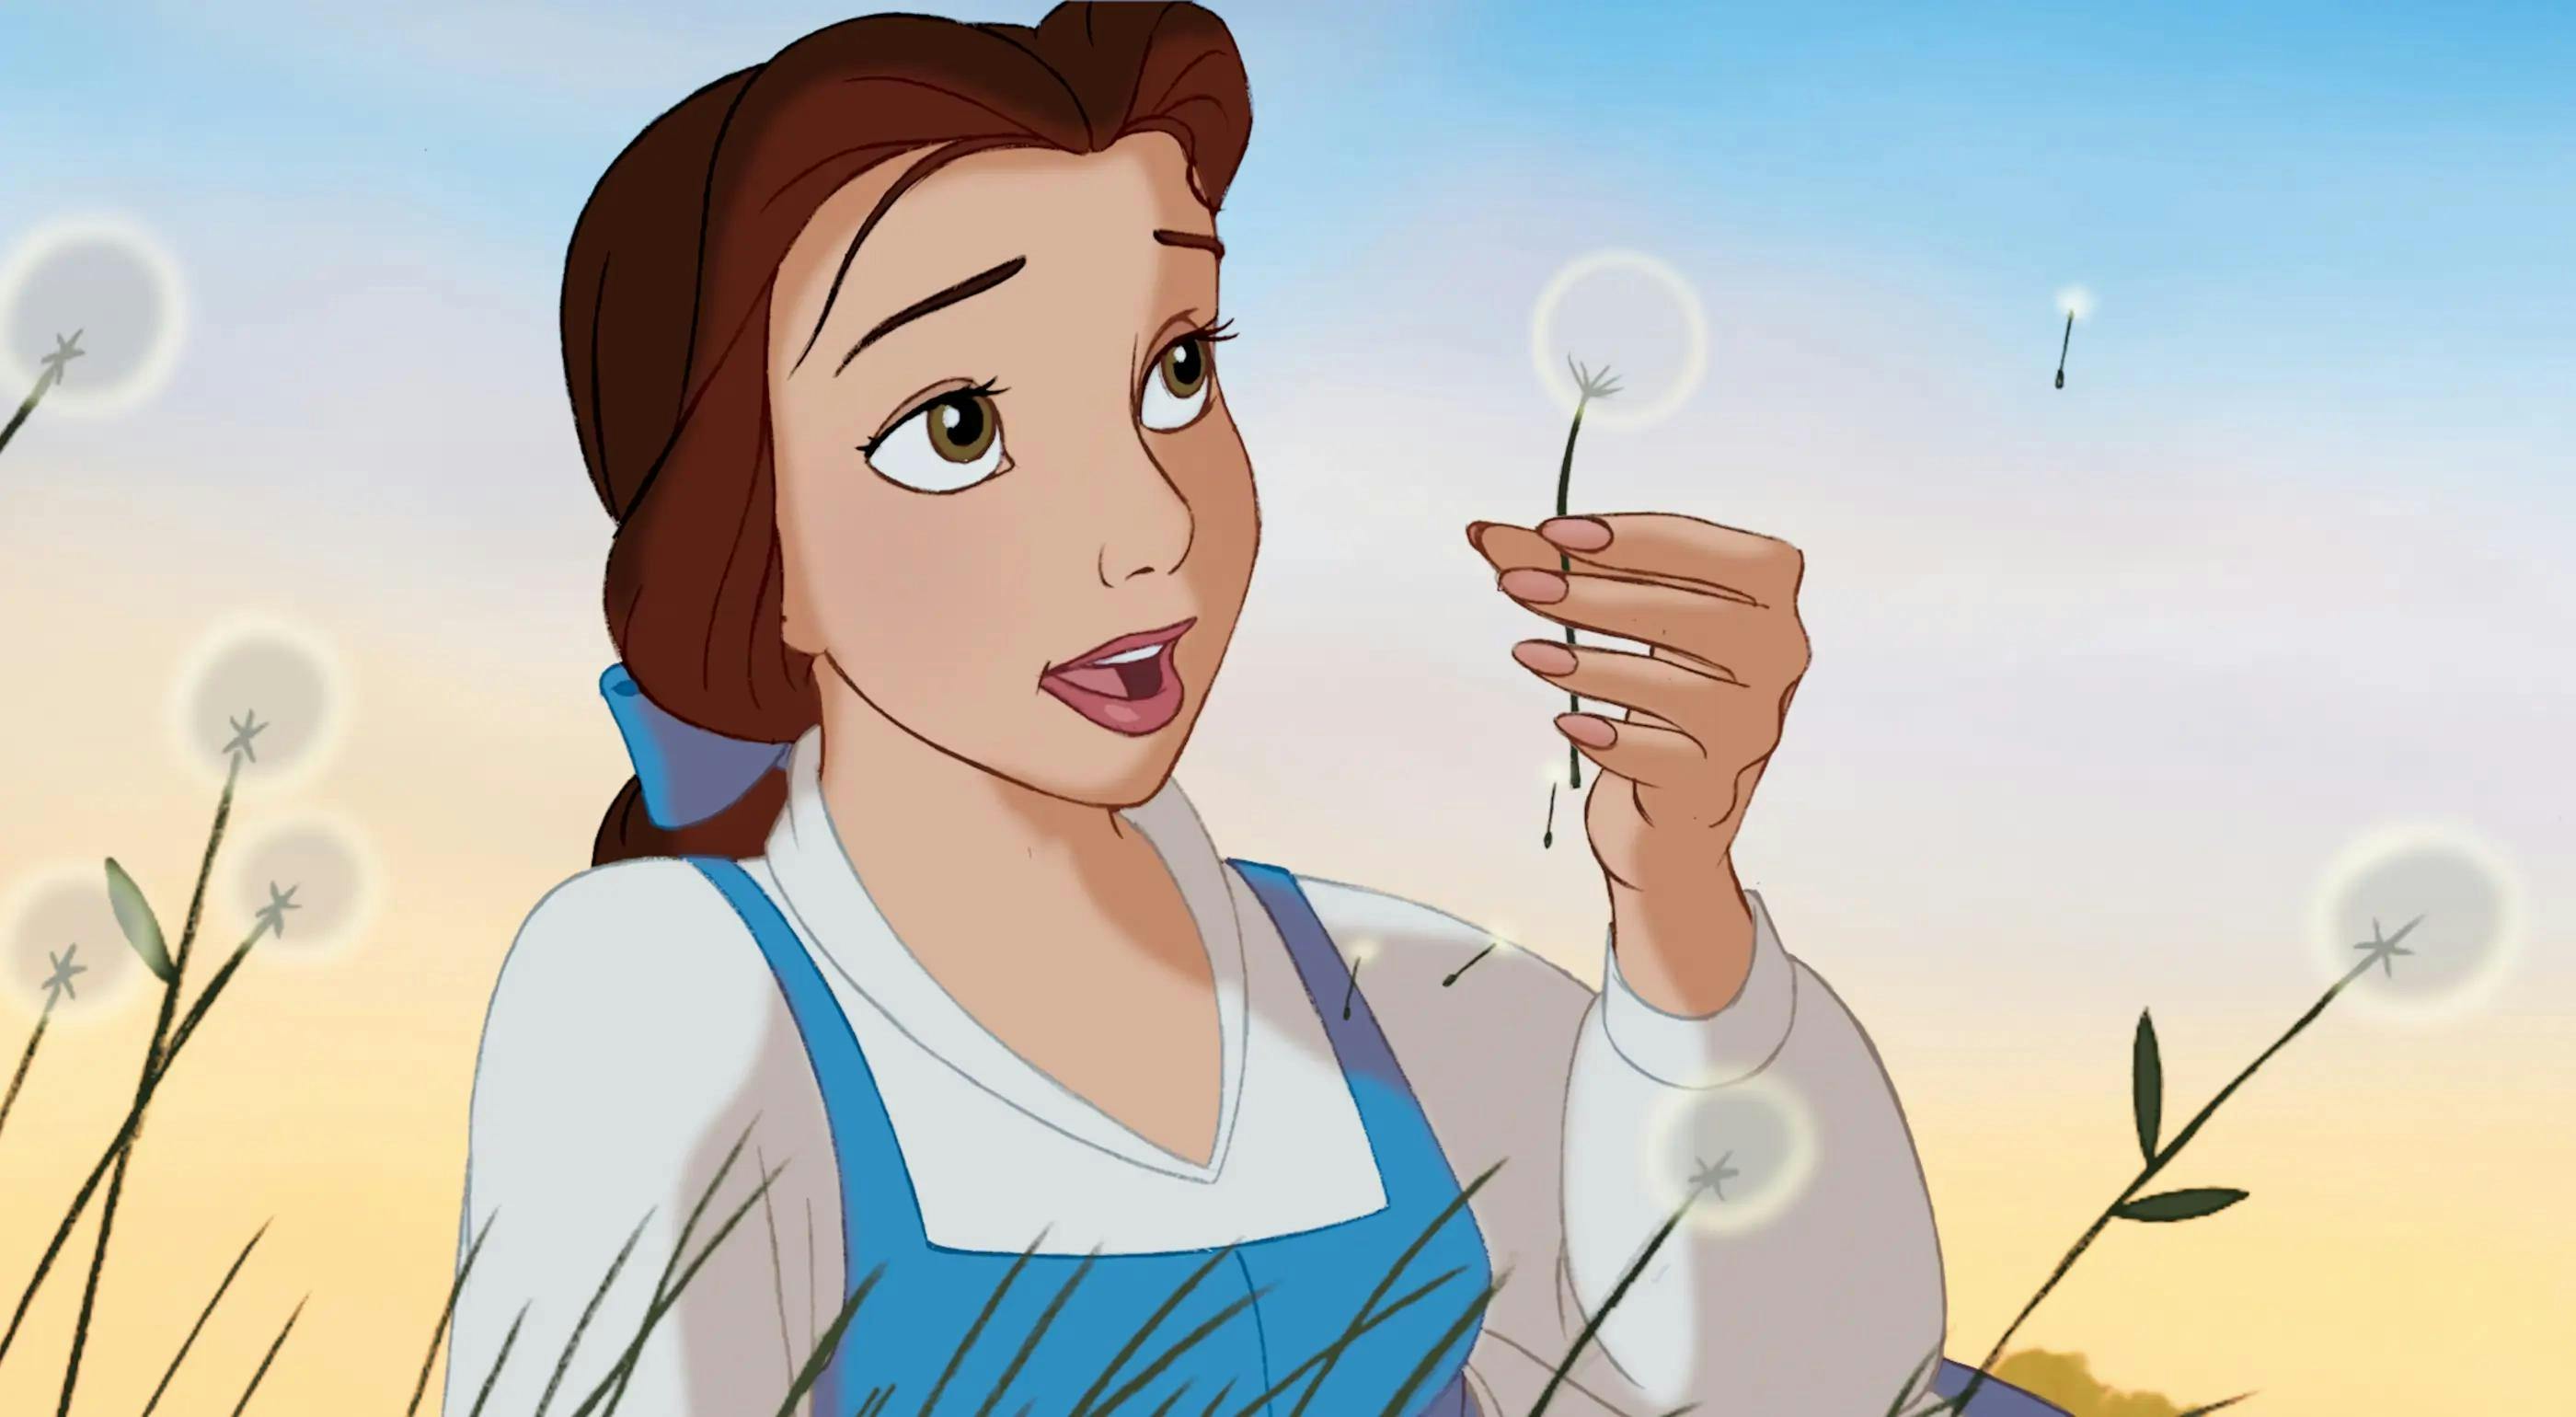 Personality type of Belle